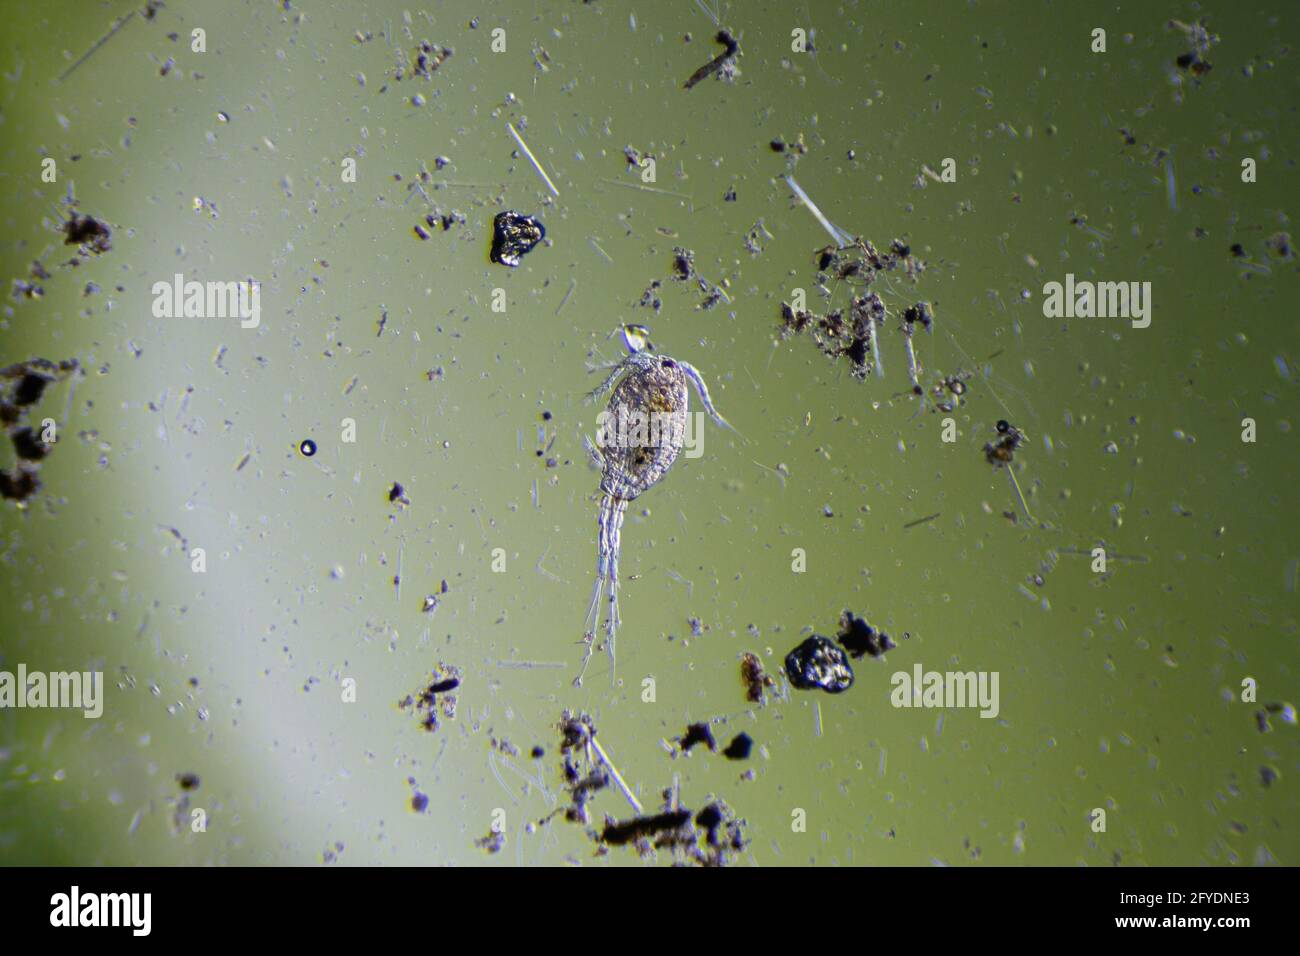 Copepod Cyclops is small crustacean found in freshwater pond. Zooplankton, micro crustacean under the light microscope. Magnification of 40 times, mic Stock Photo